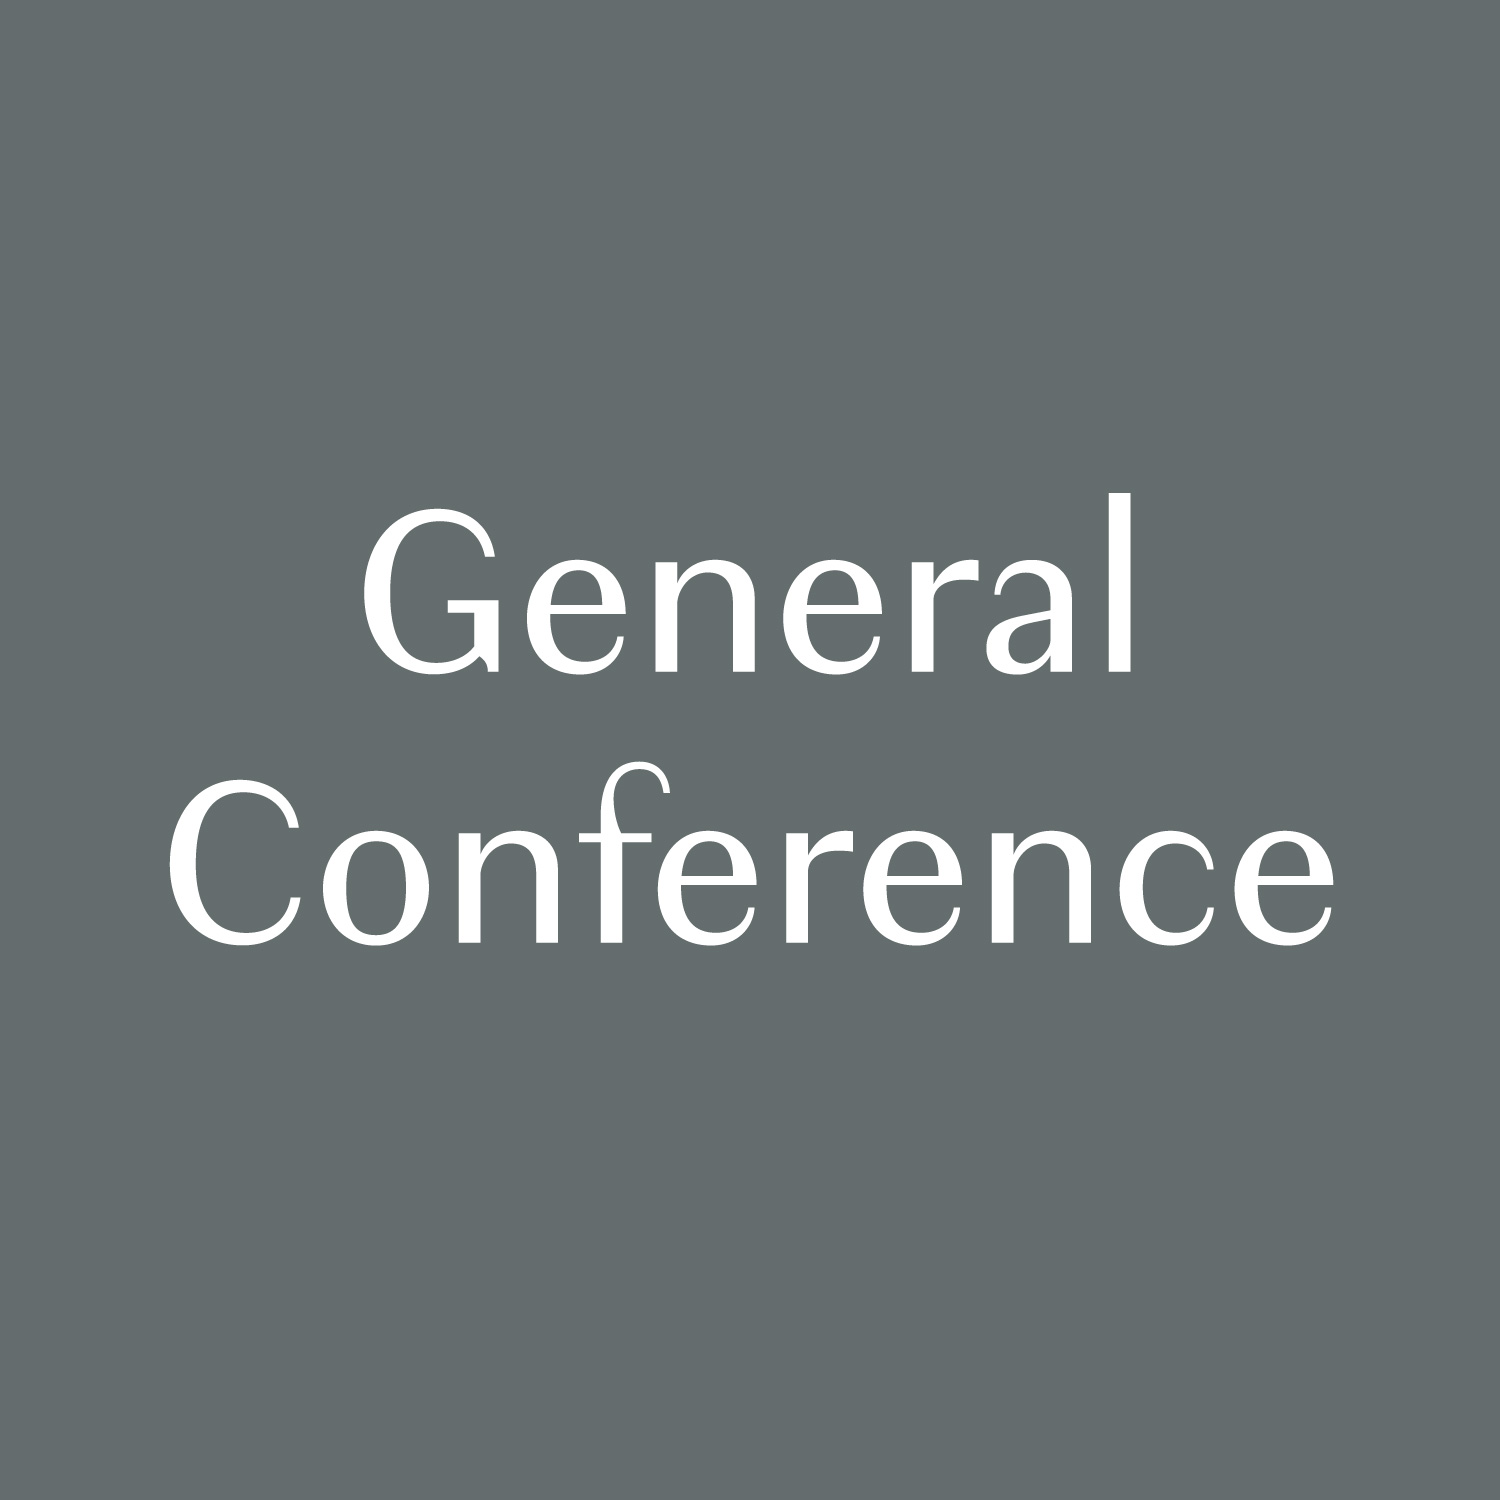 General Conference LDS